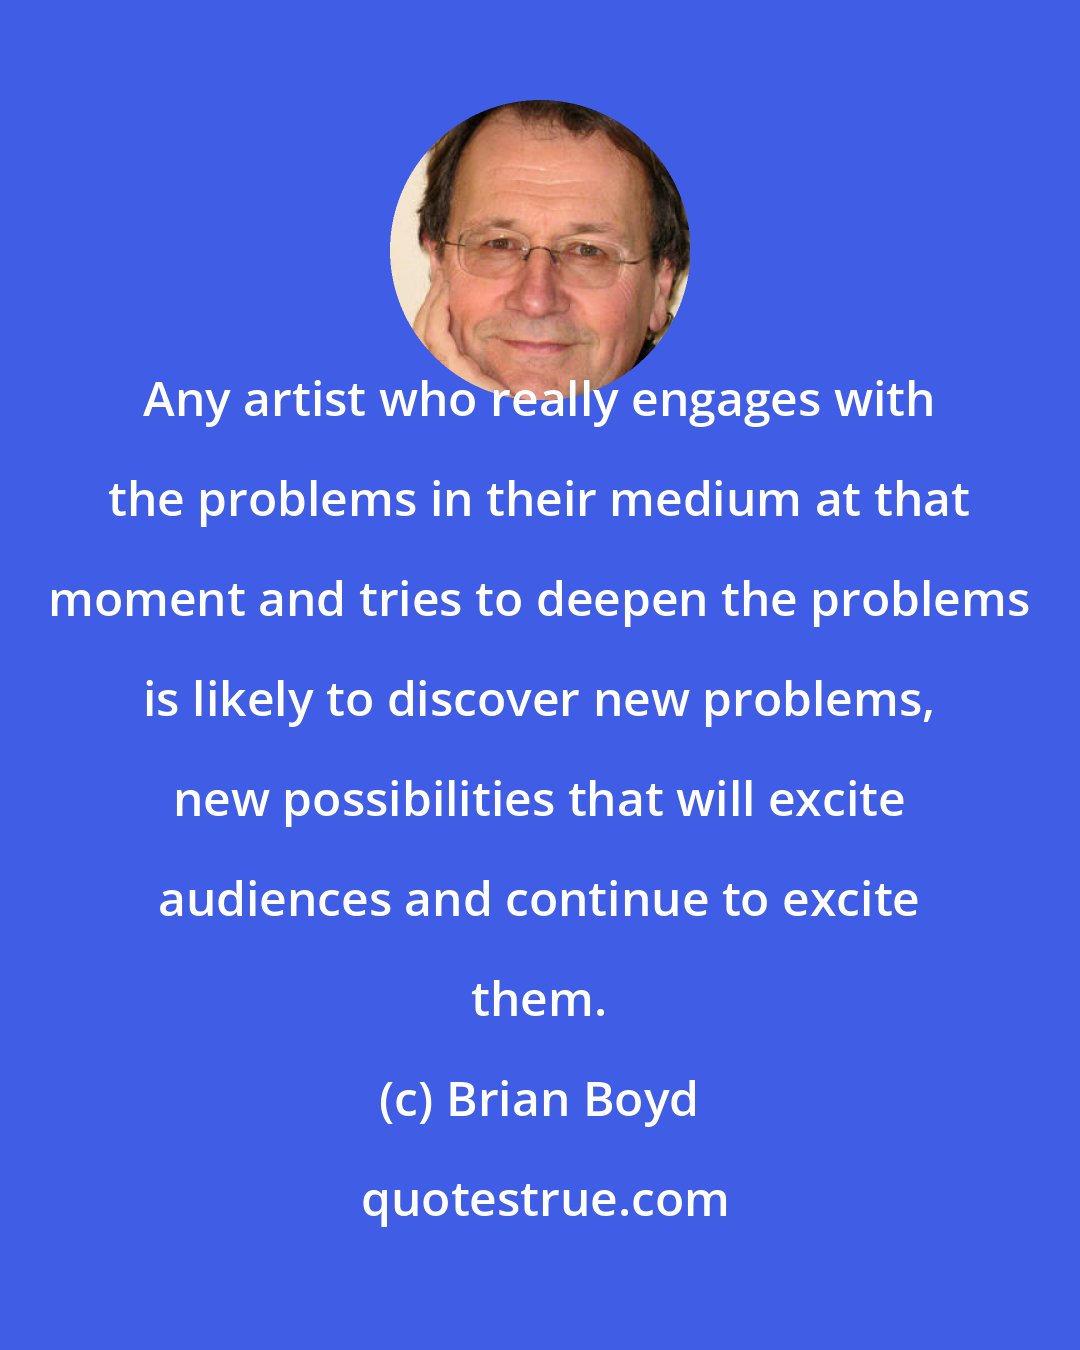 Brian Boyd: Any artist who really engages with the problems in their medium at that moment and tries to deepen the problems is likely to discover new problems, new possibilities that will excite audiences and continue to excite them.